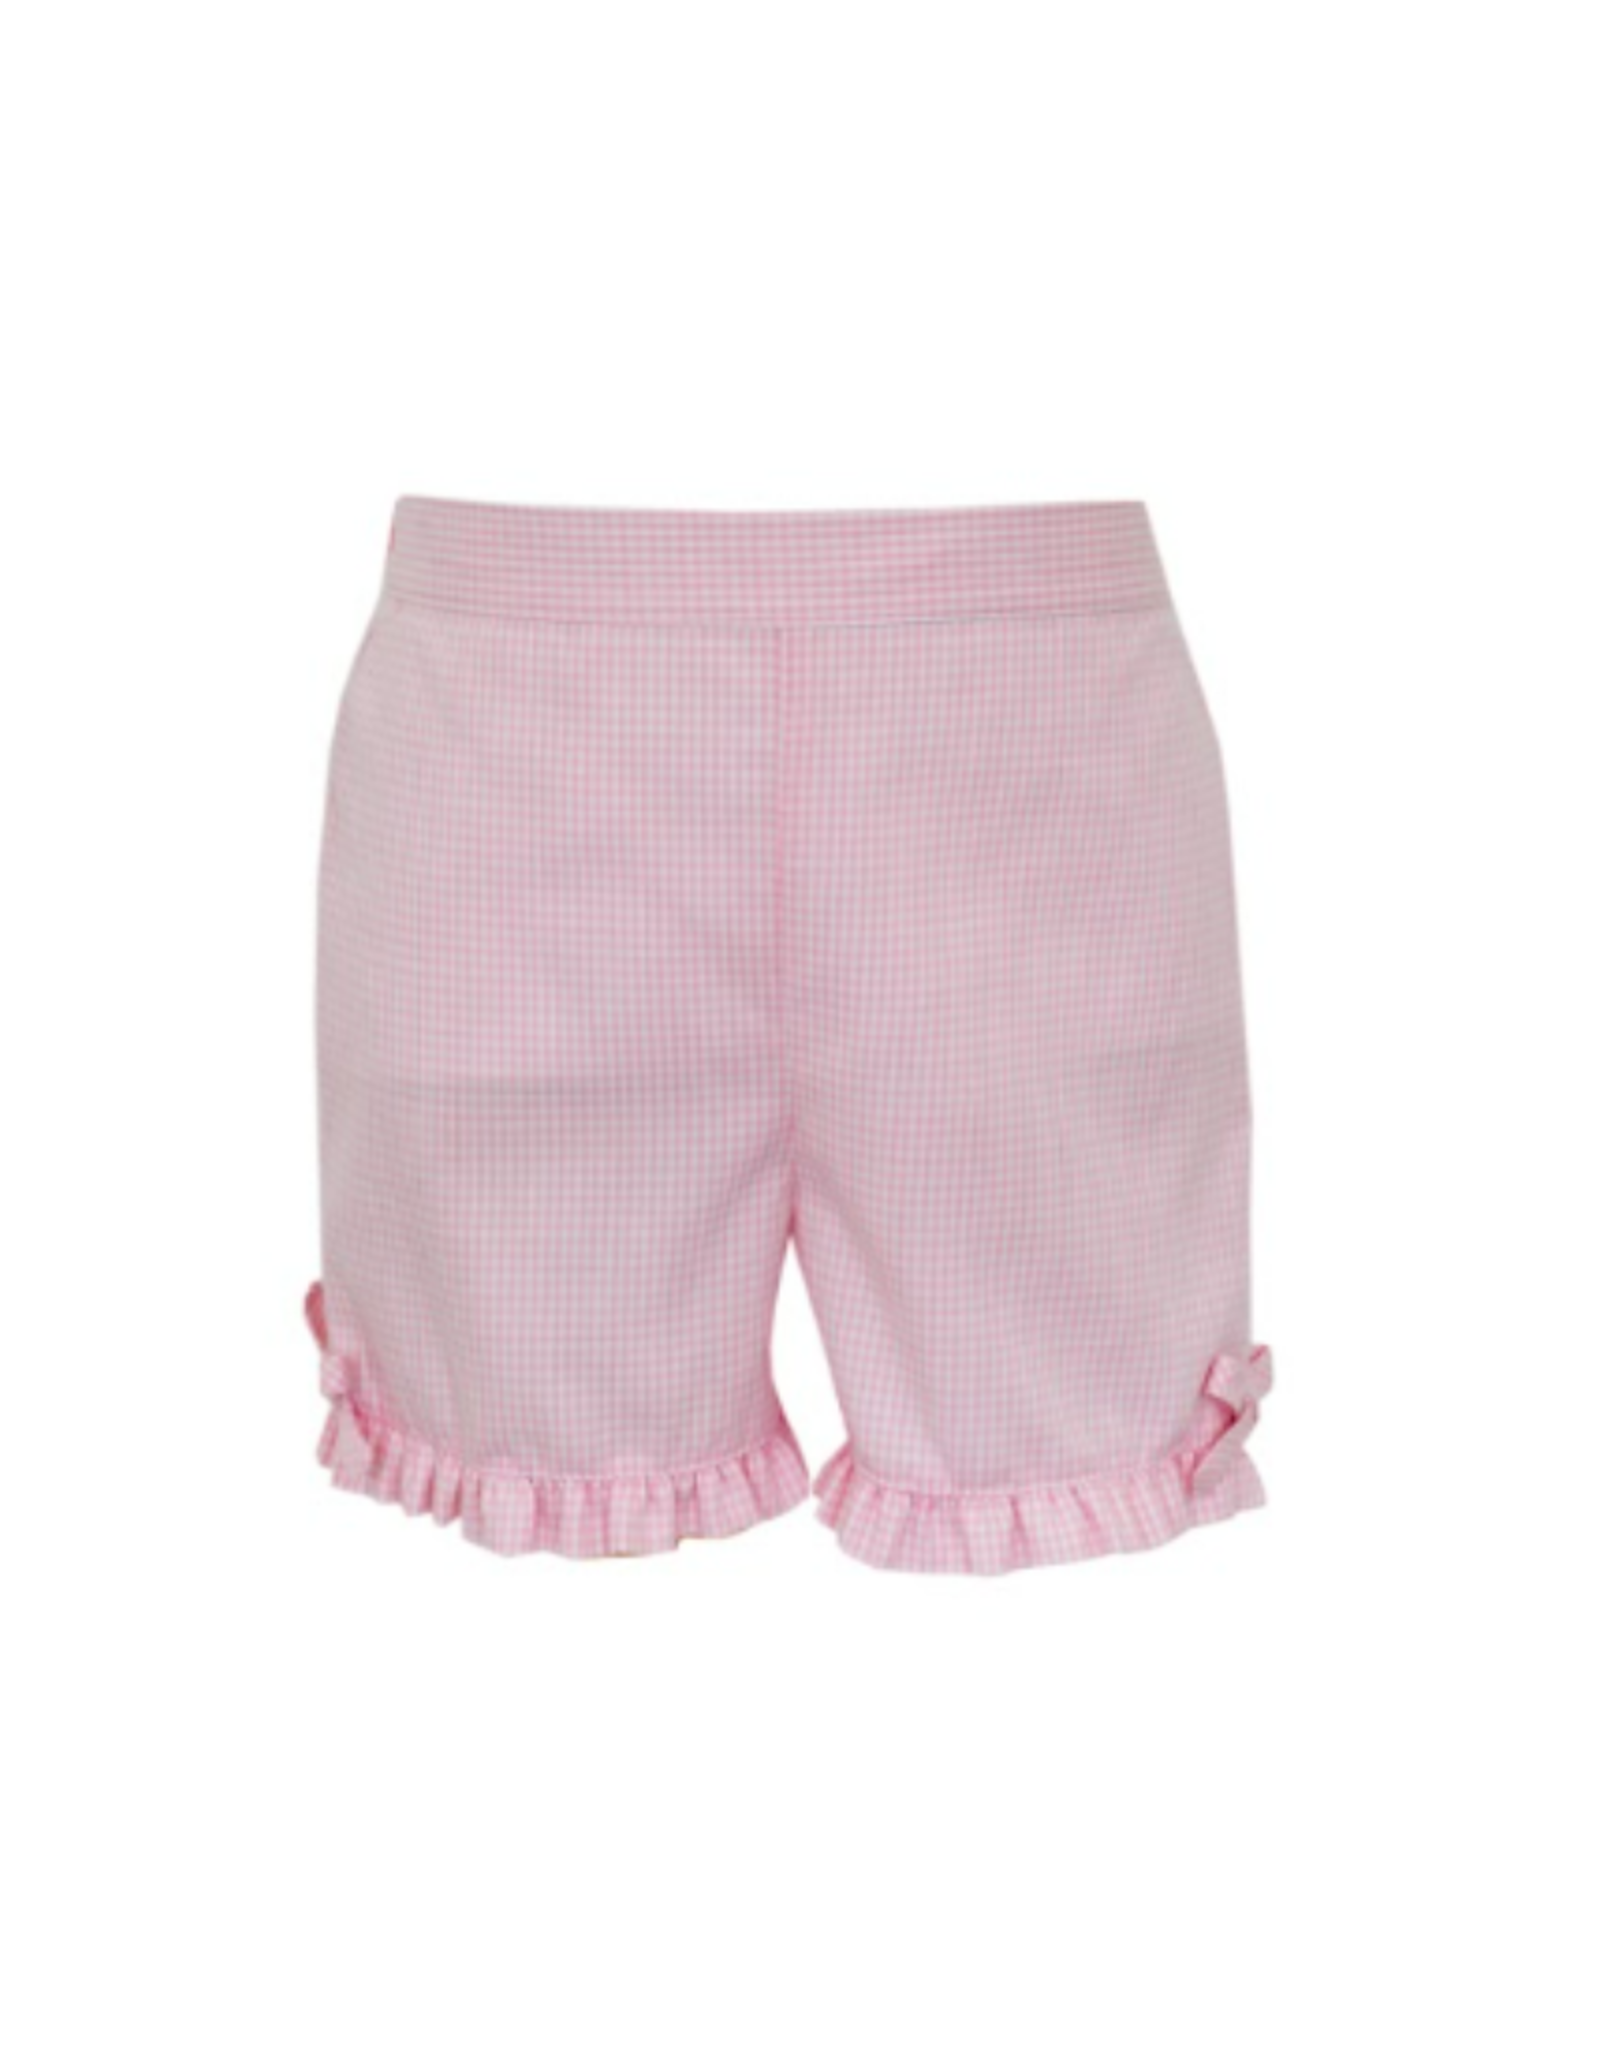 Anavini Pink Gingham Ruffle Shorts with Bow